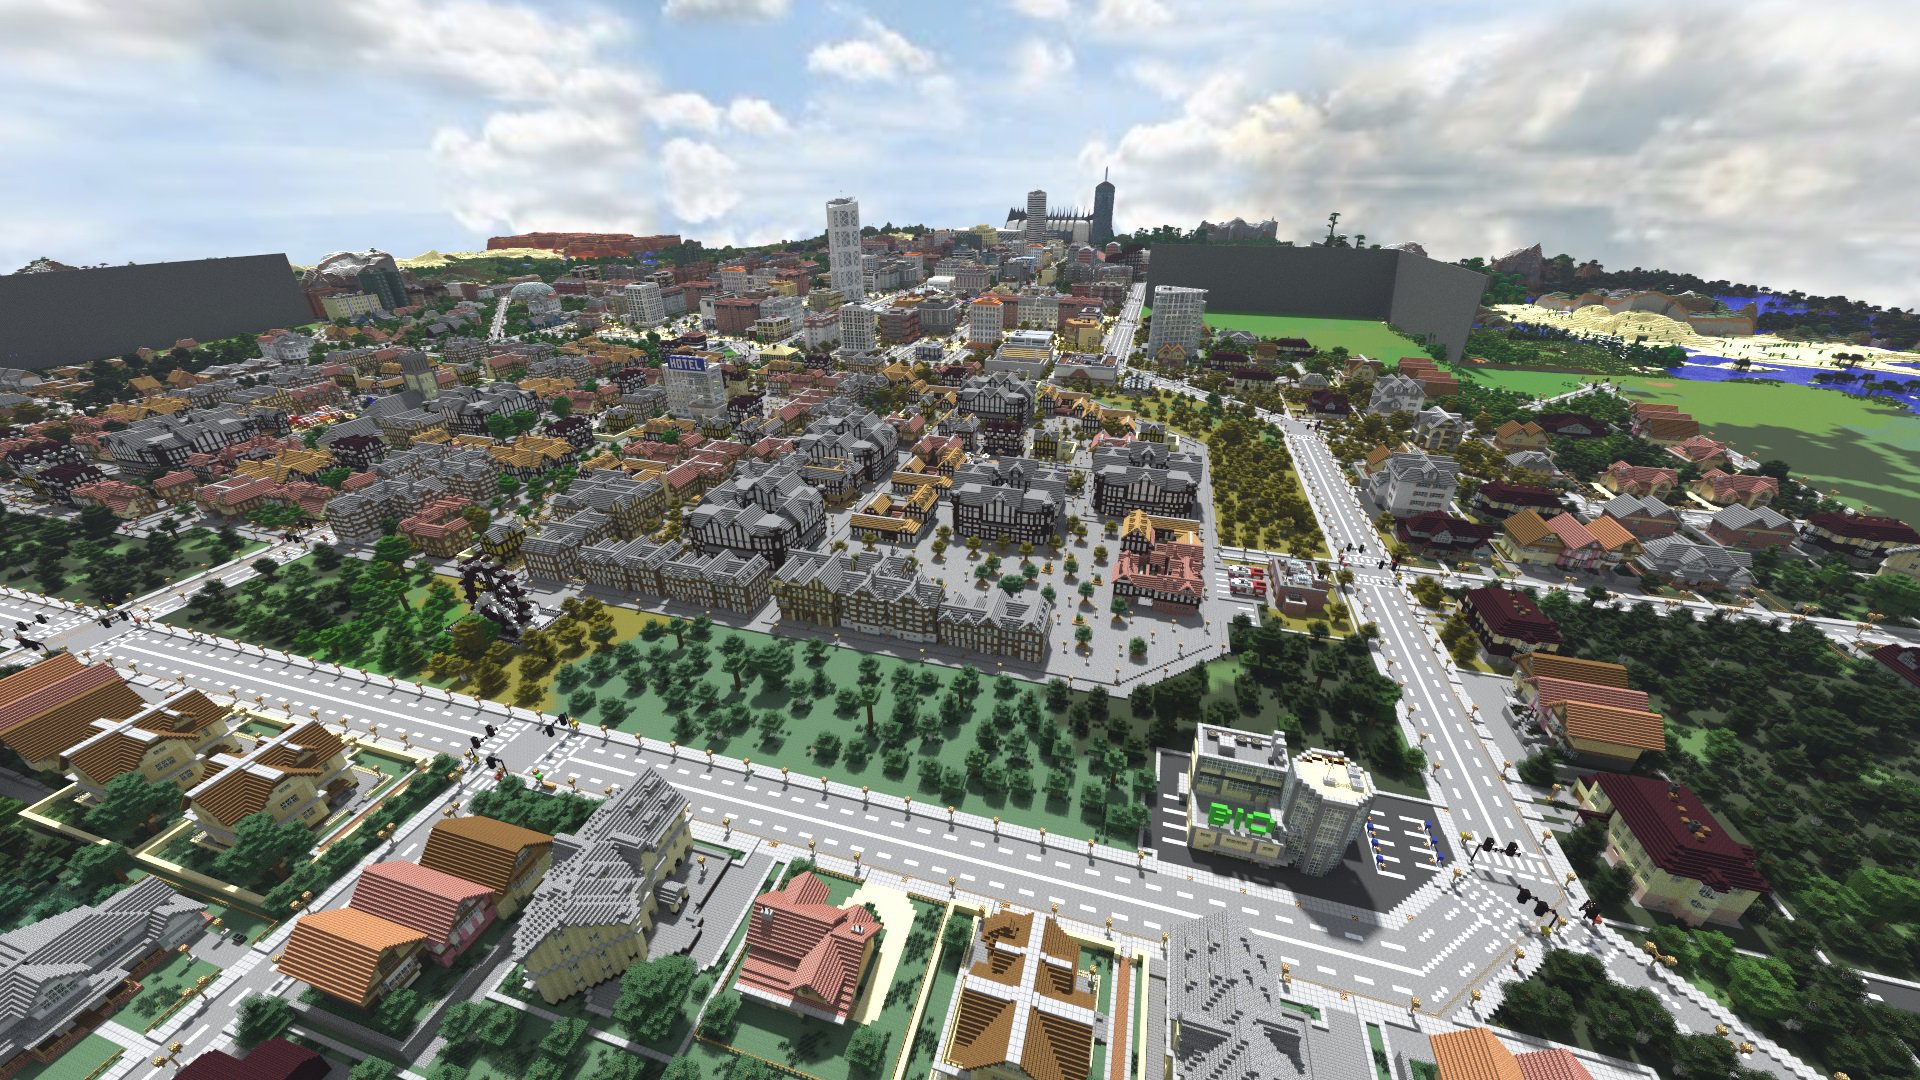 city maps for minecraft 1.12.2